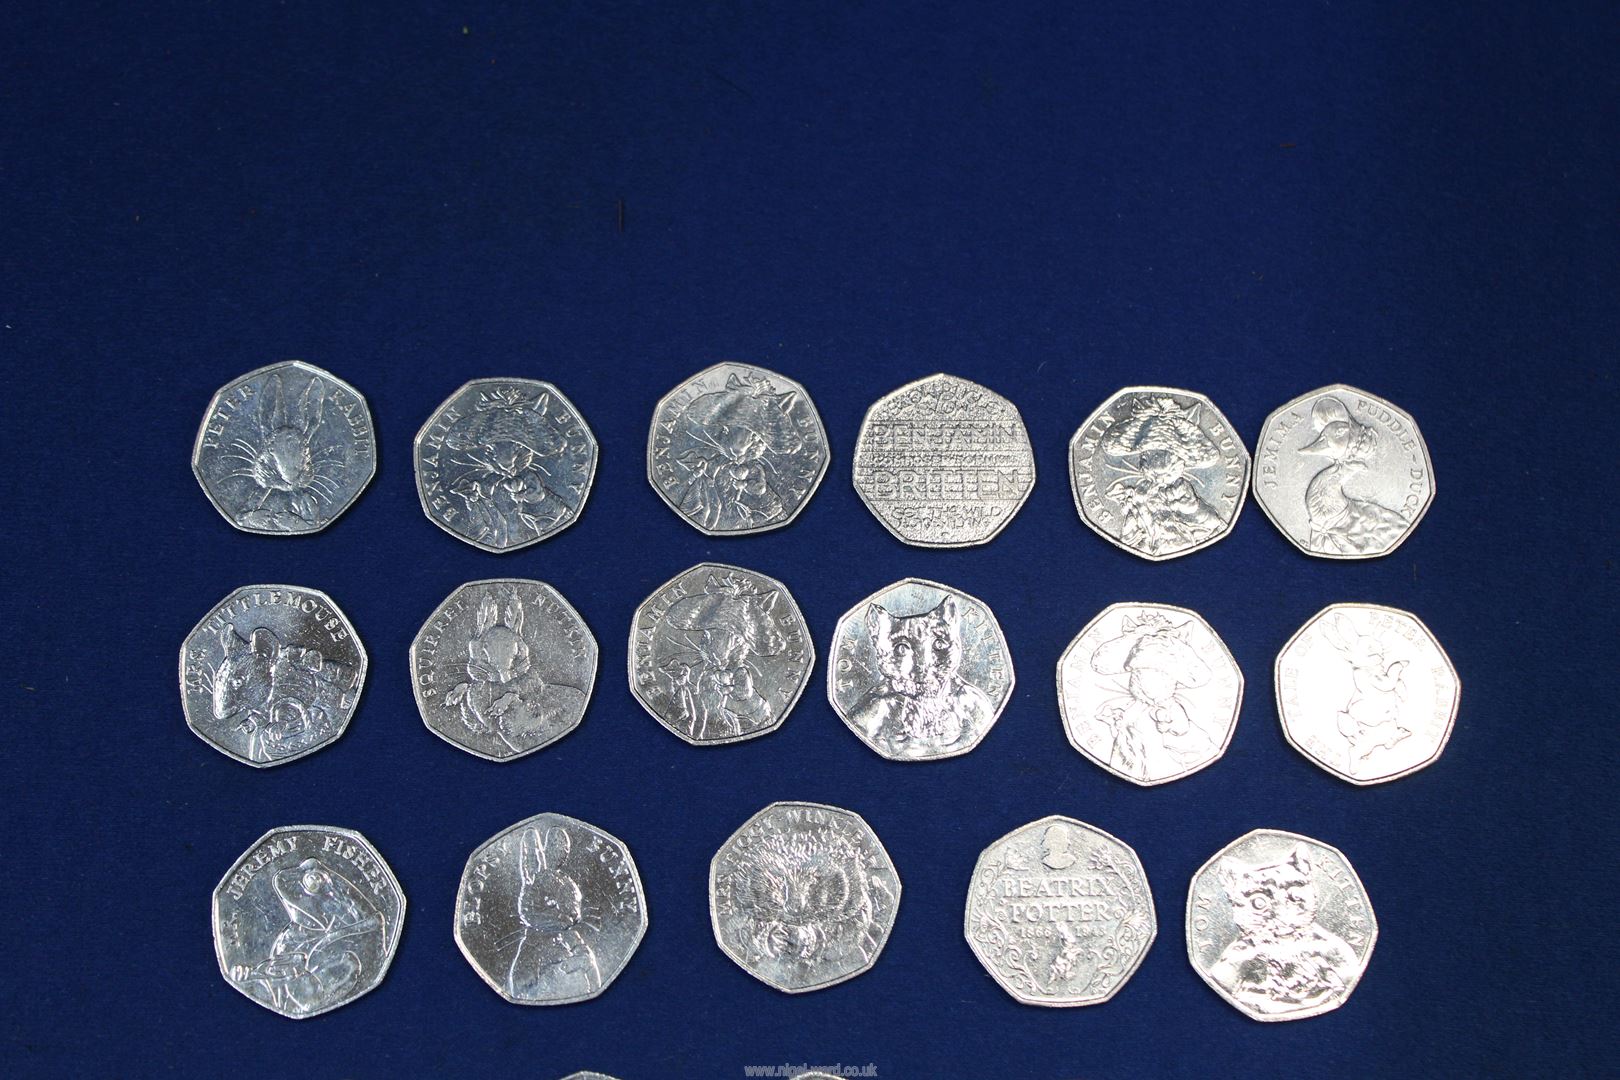 A quantity of collectible 50p coins including; Beatrix Potter, Olympics, Paddington, Isaac Newton, - Image 2 of 4